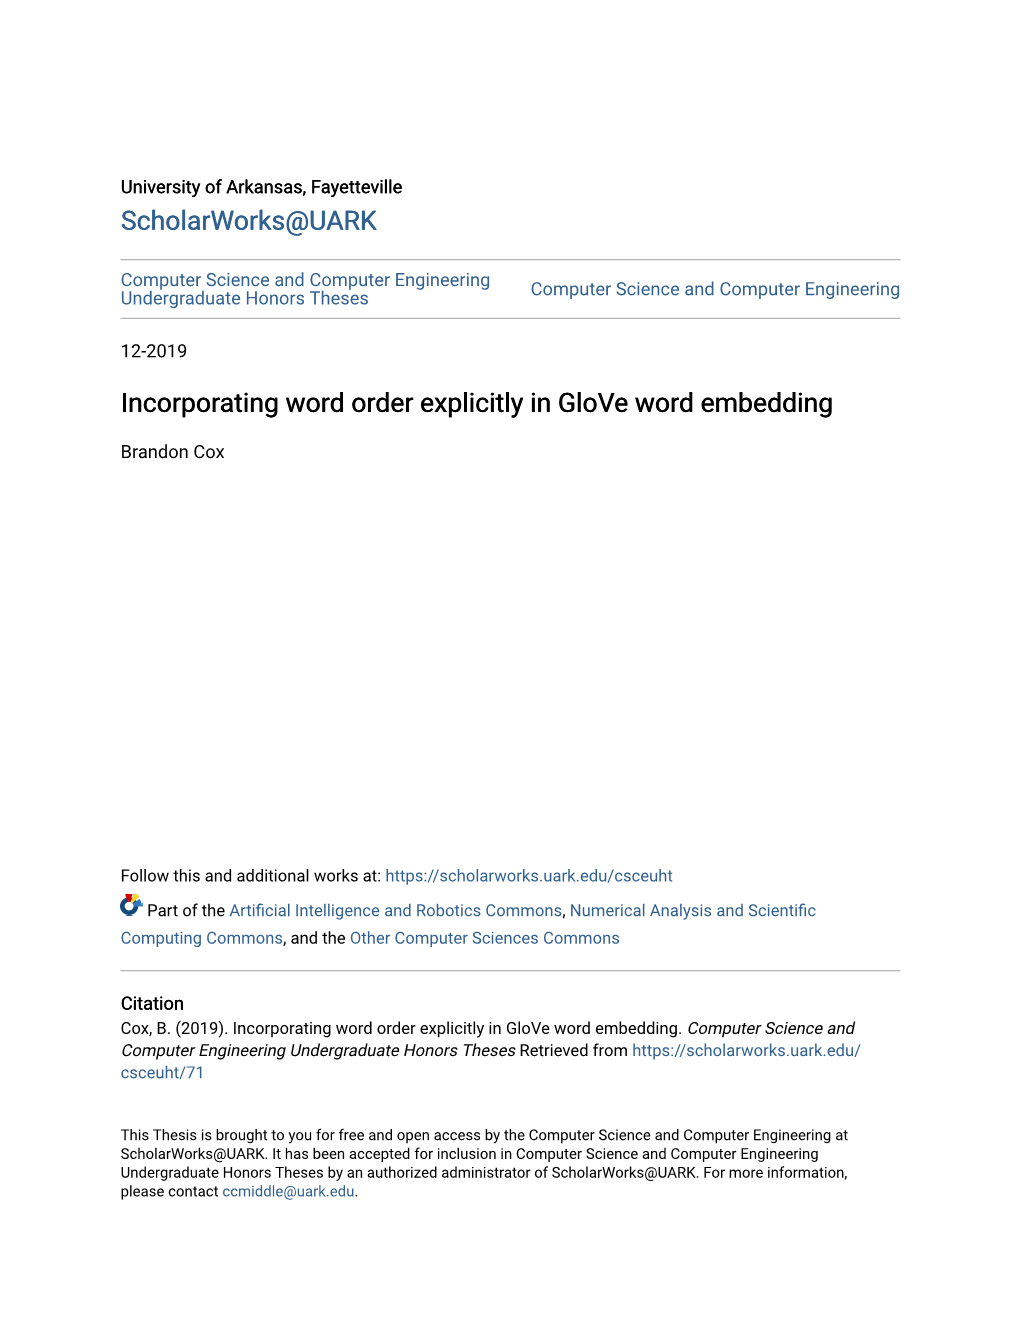 Incorporating Word Order Explicitly in Glove Word Embedding